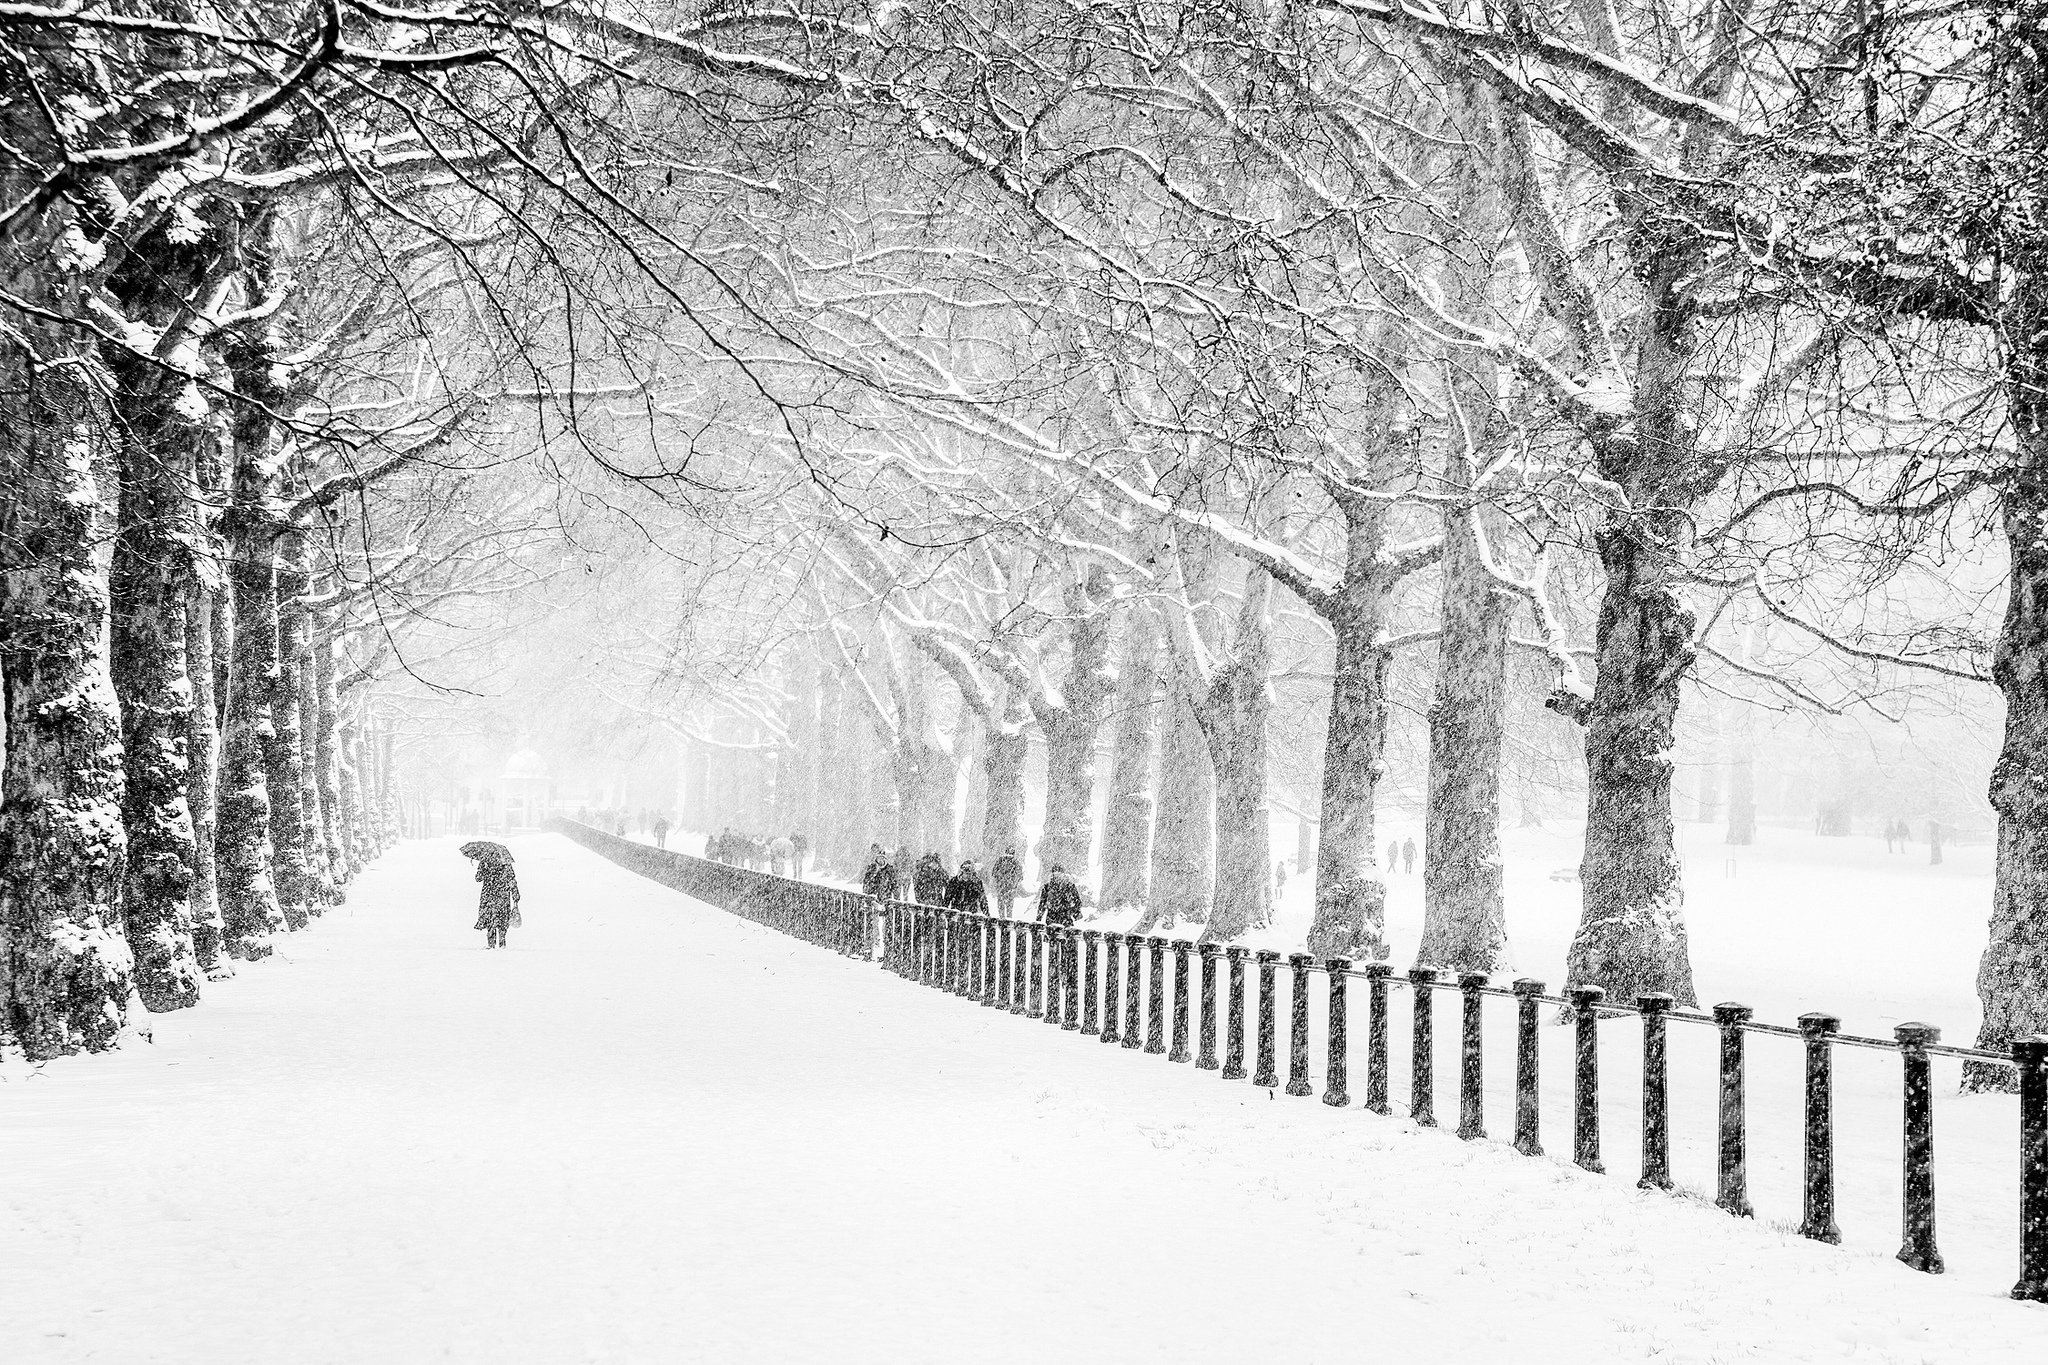 winter snow people park city London road trees wallpaper background